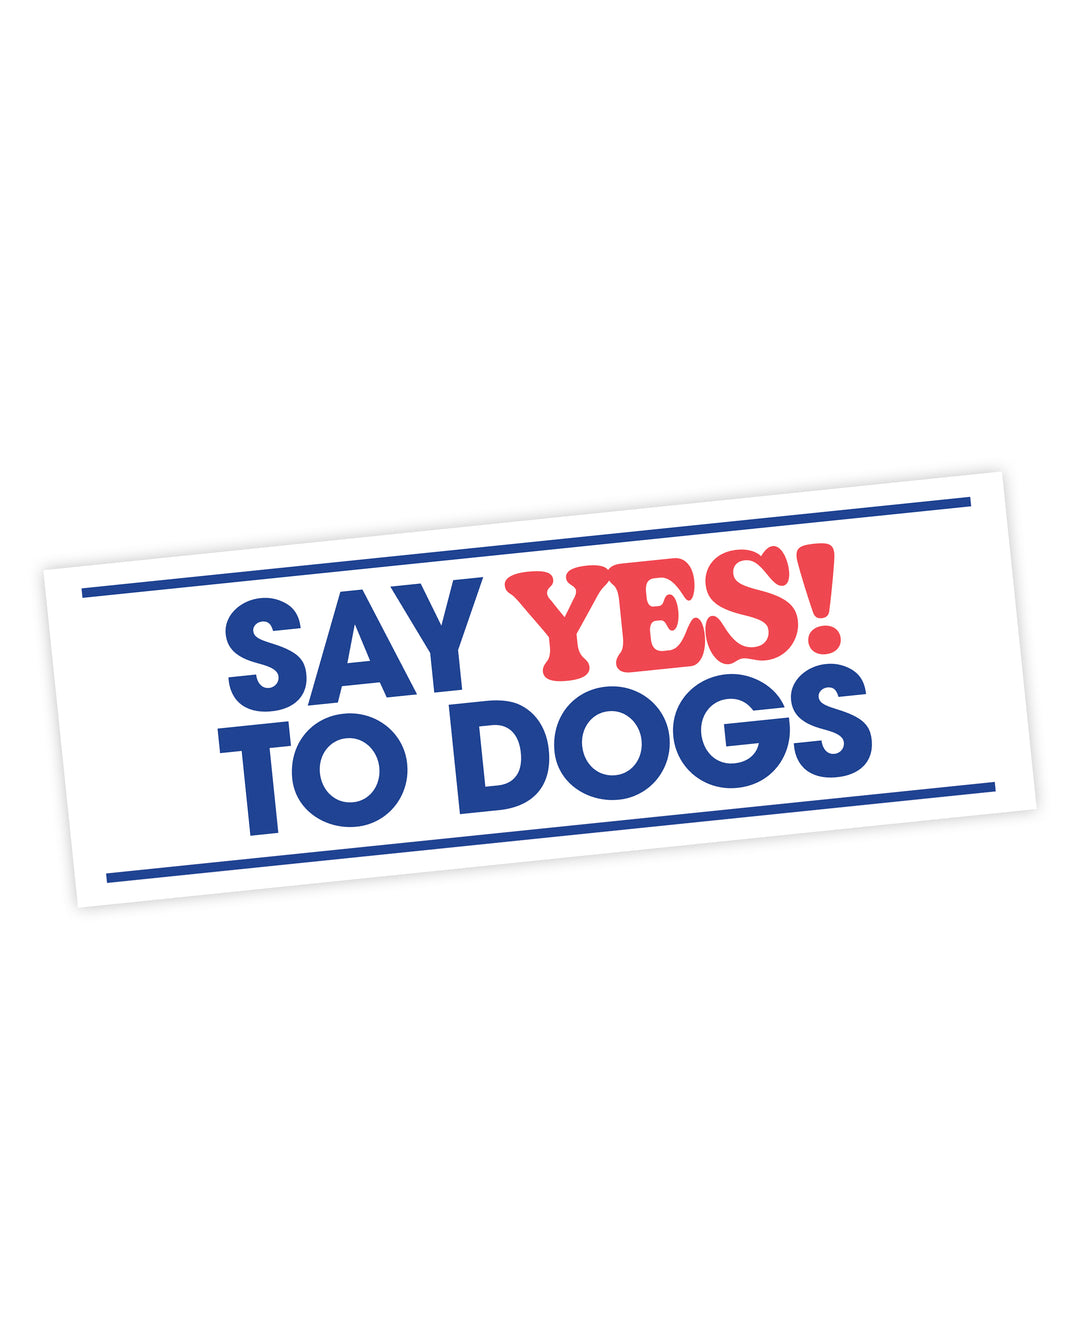 Say Yes To Dogs Bumper Sticker